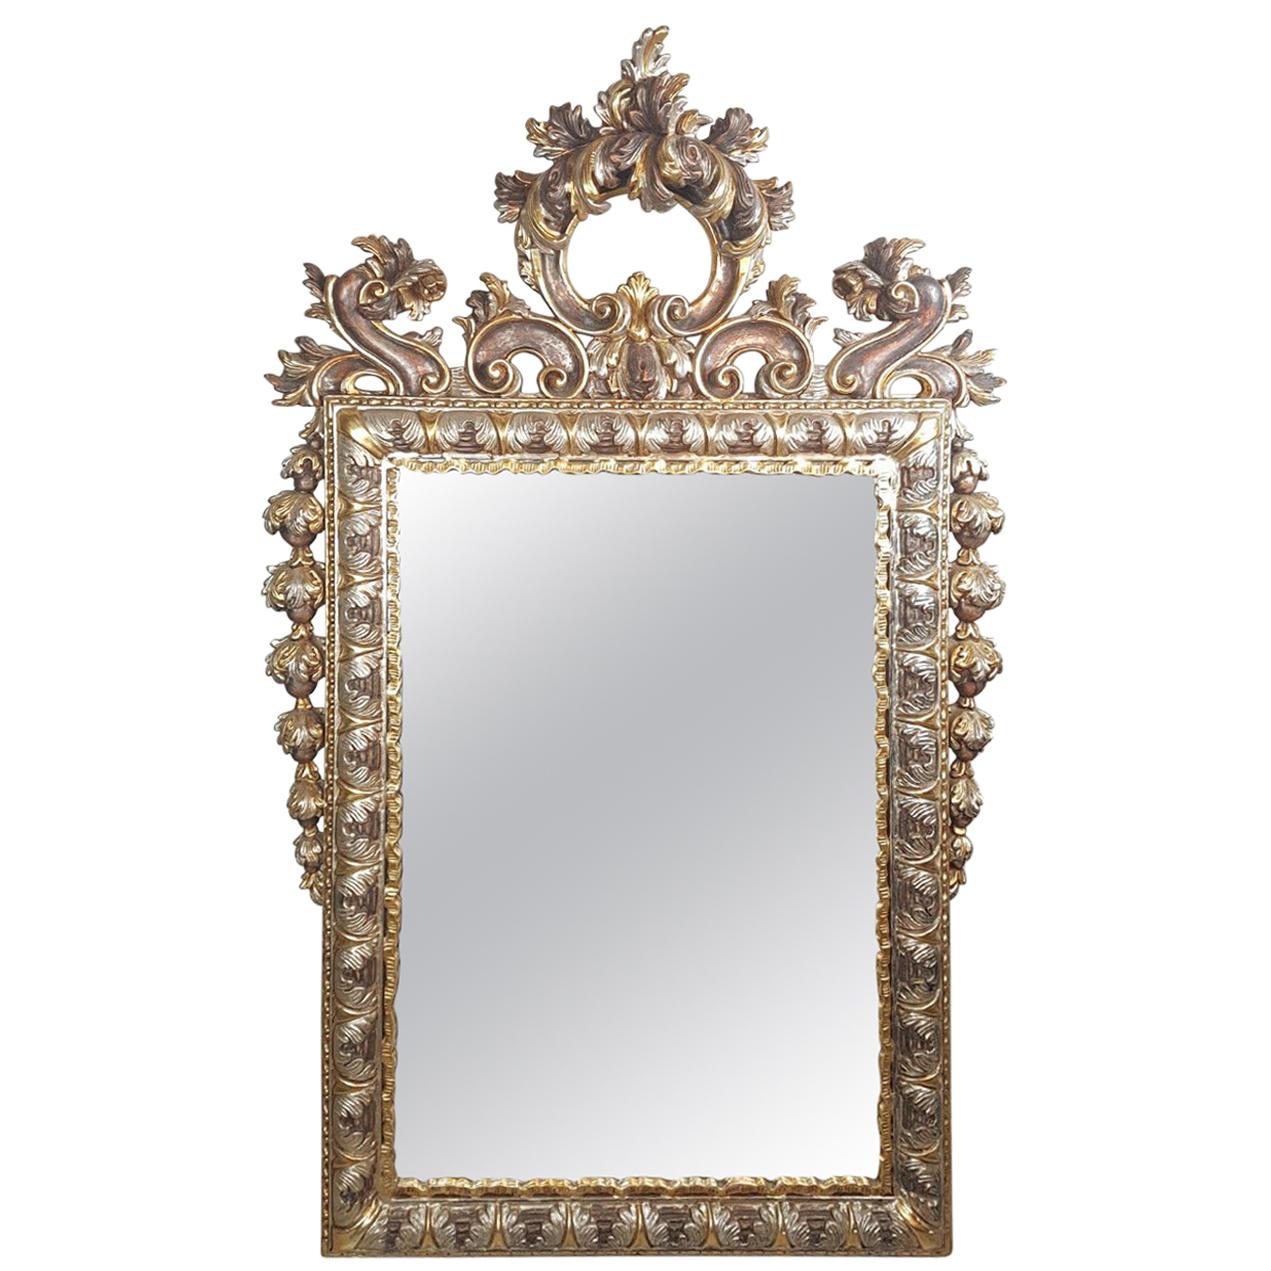 20th Century Italian Baroque Style Carved Gilded Wood Wall Mirror